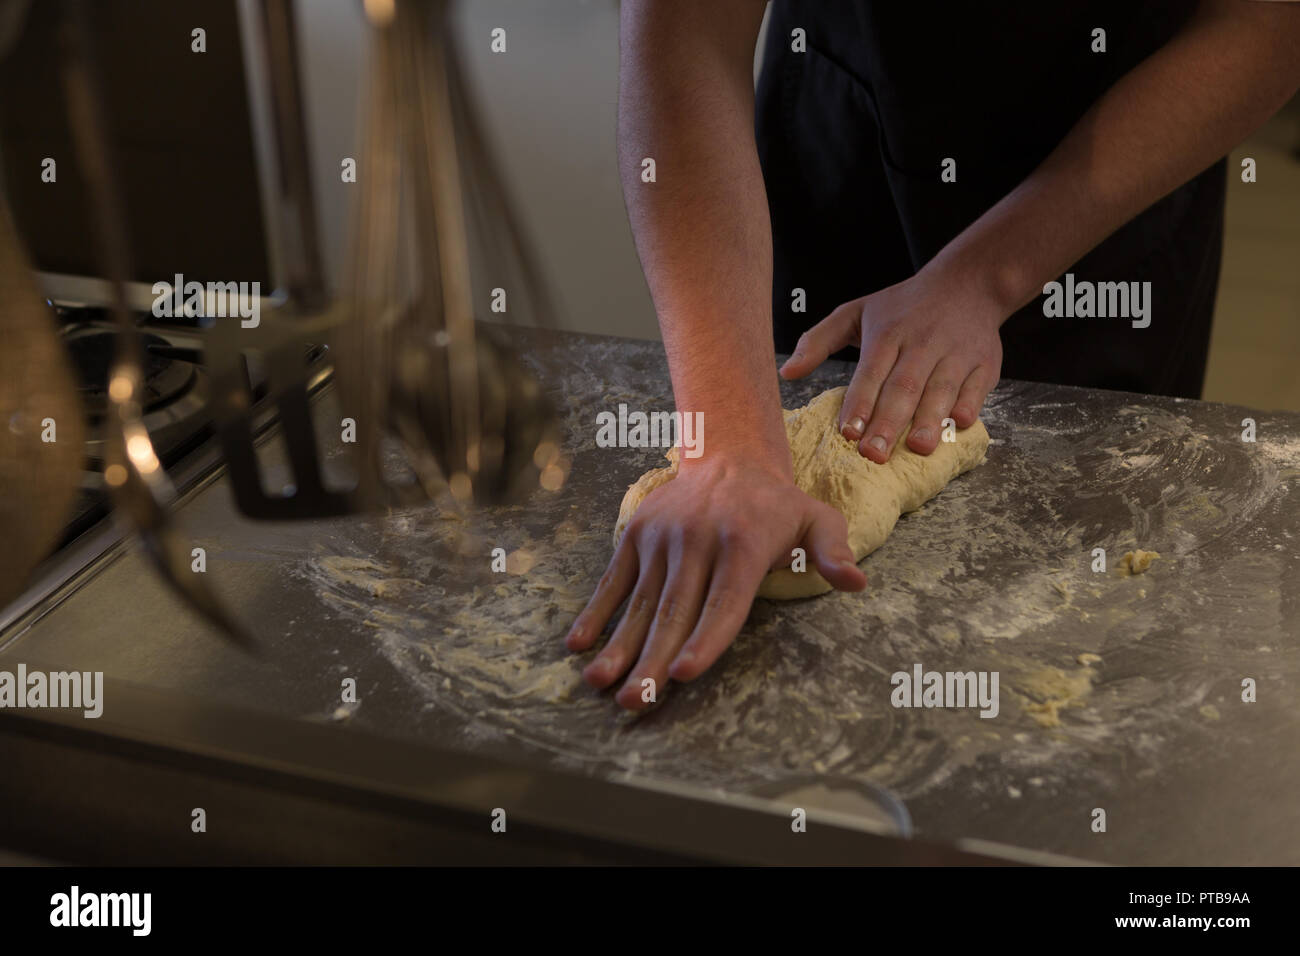 Chef kneading dough in kitchen at restaurant Stock Photo